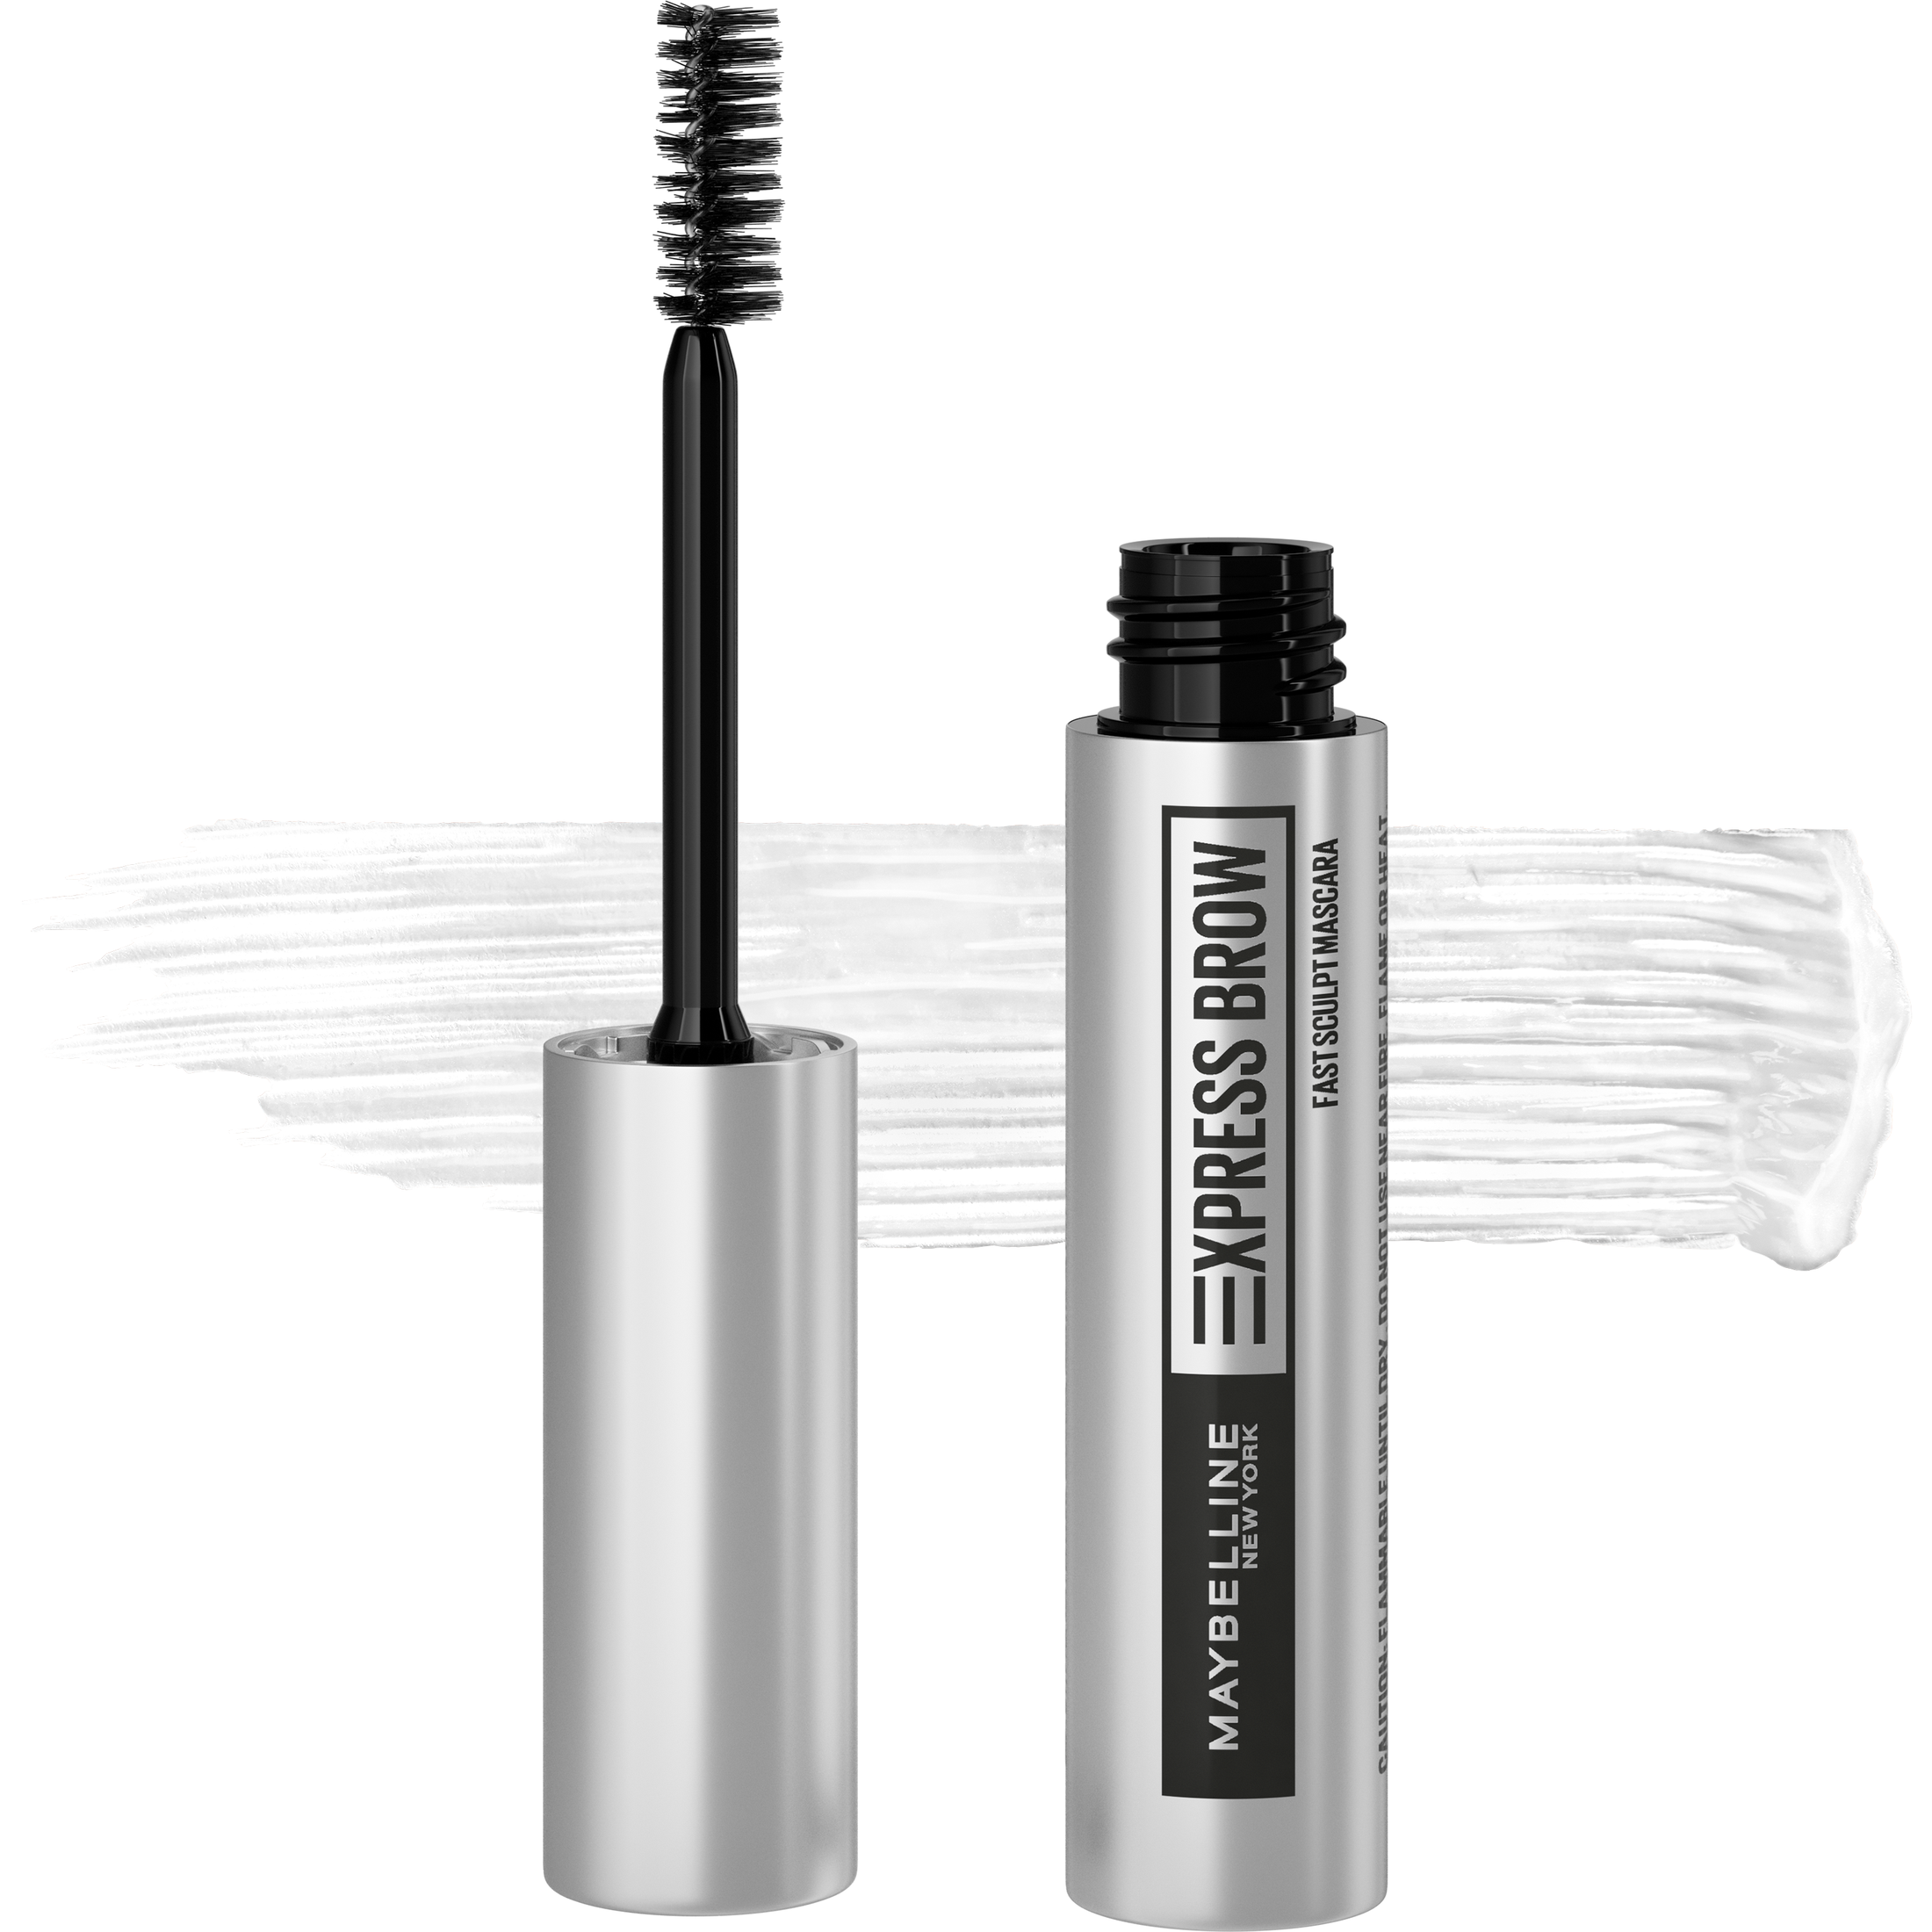 Maybelline Brow Fast Sculpt Eyebrow Gel Mascara, Clear - image 1 of 8